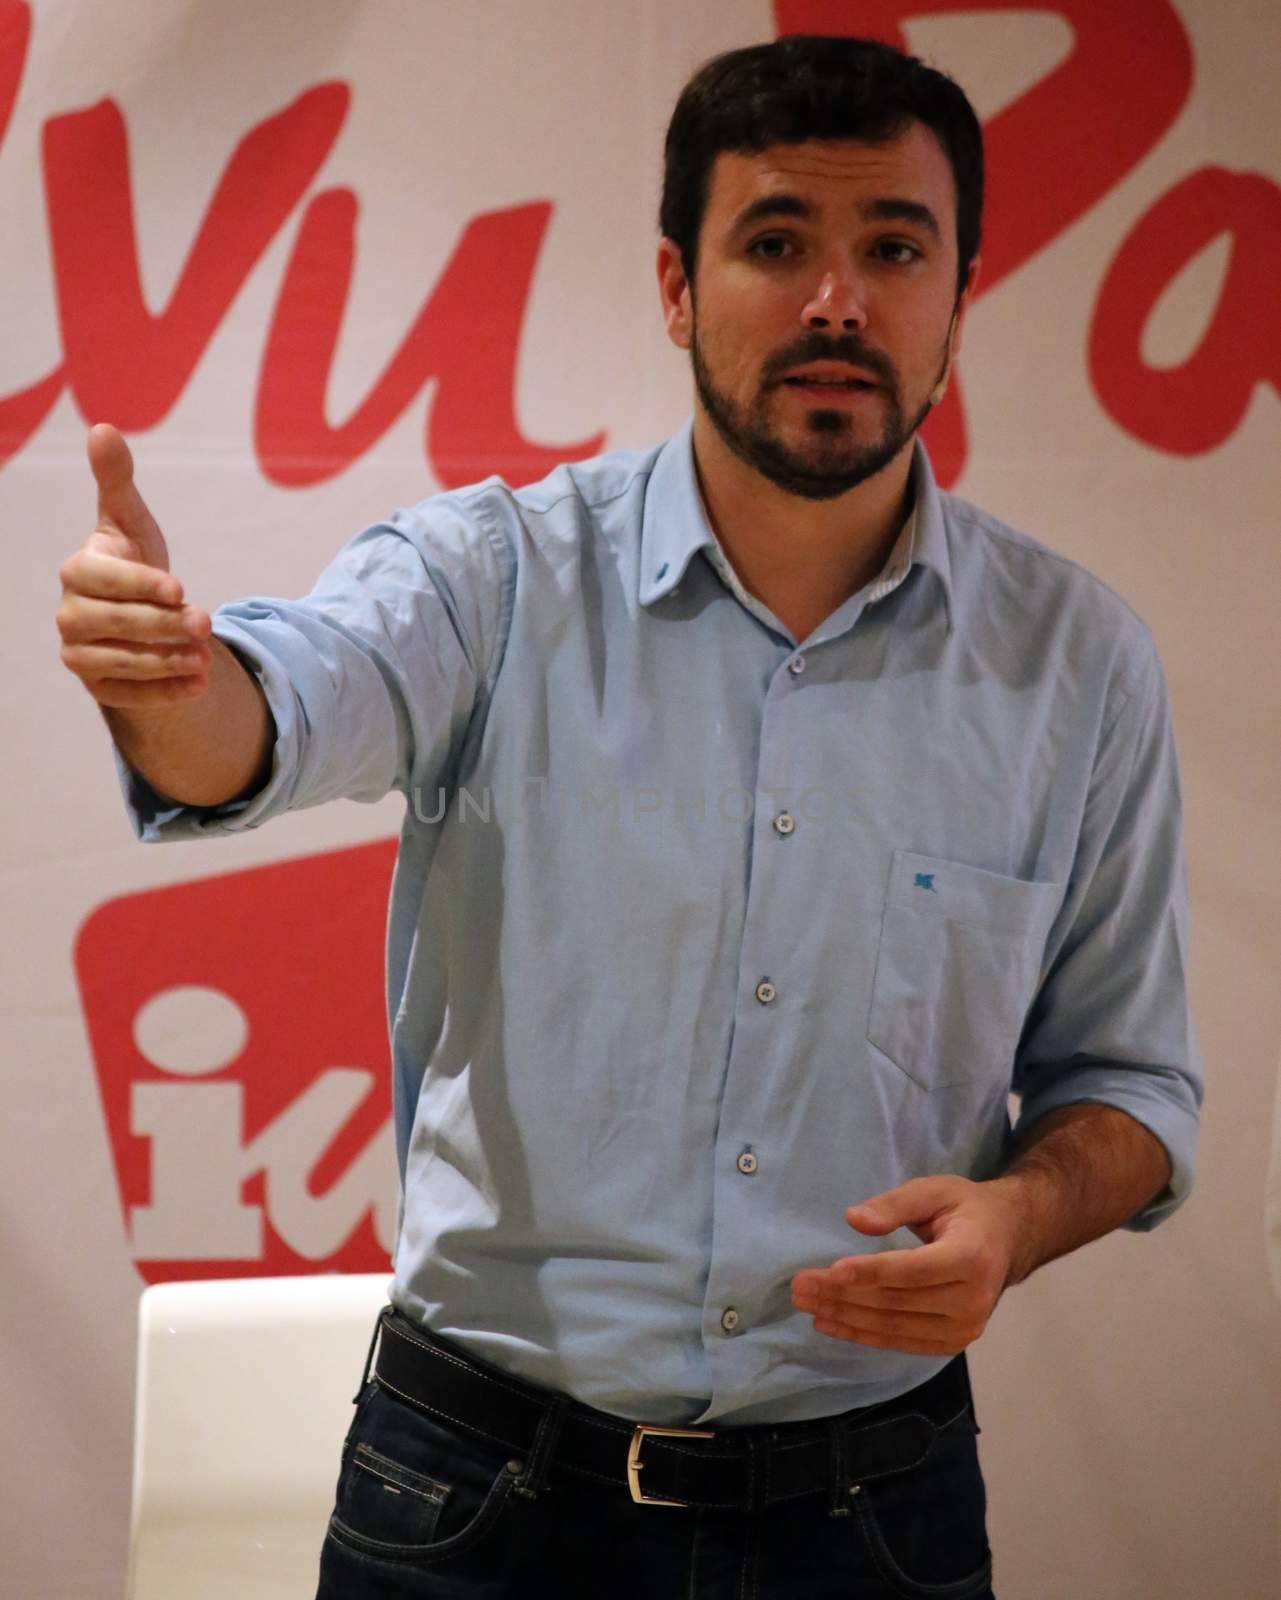 SPAIN, Oviedo: The Popular Unity candidate, Alberto Garz�n, participated in a discussion with a group of young citizens on December 5, 2015.The Spanish general election will be held on or before December 20, 2015.